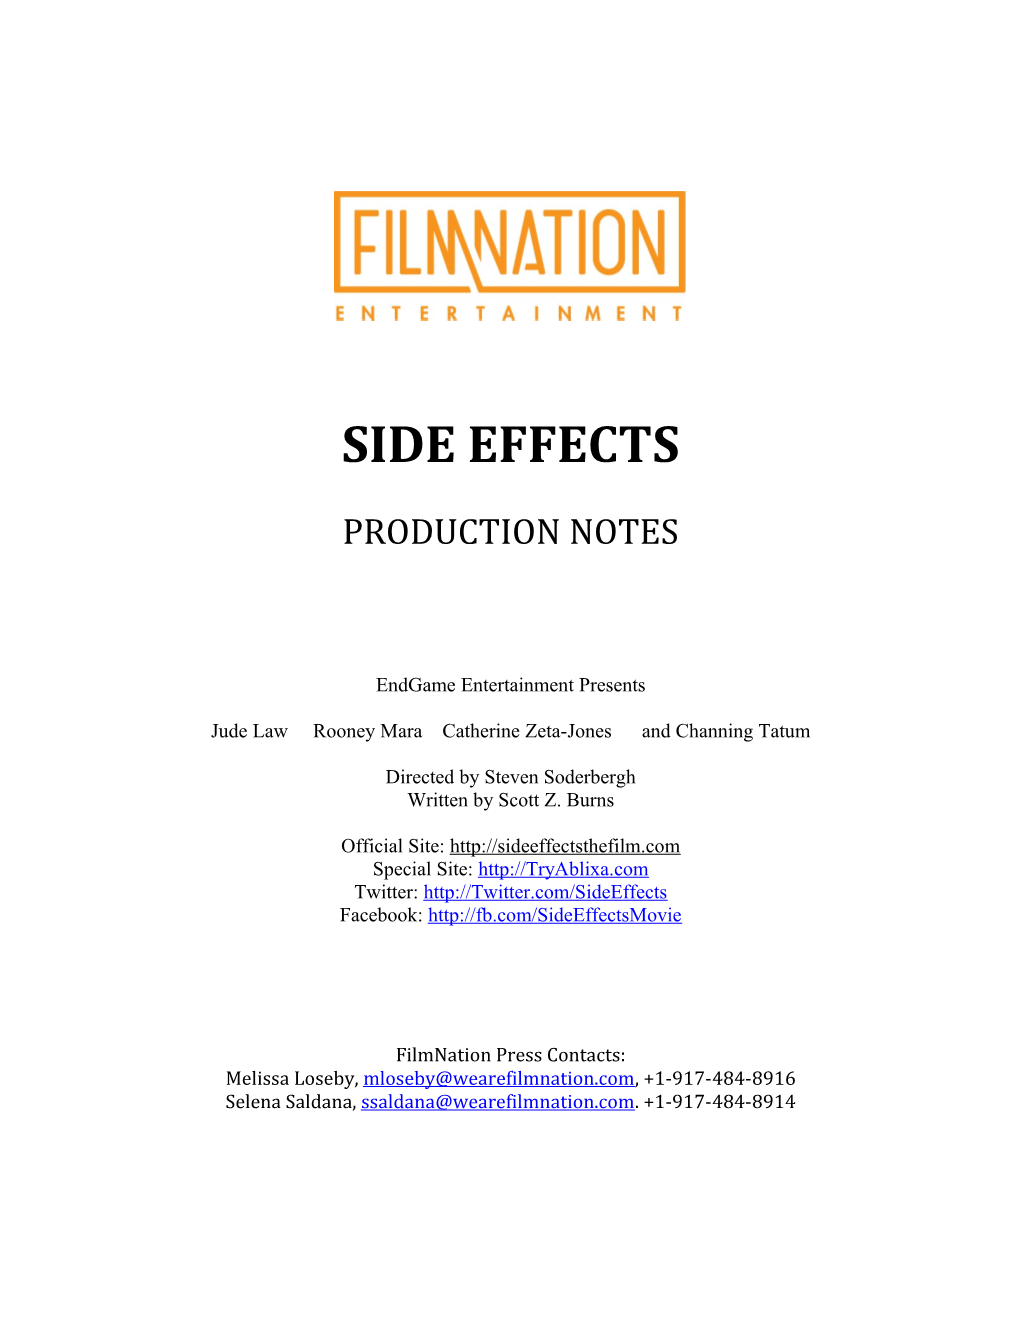 SIDE EFFECTS Production Notes